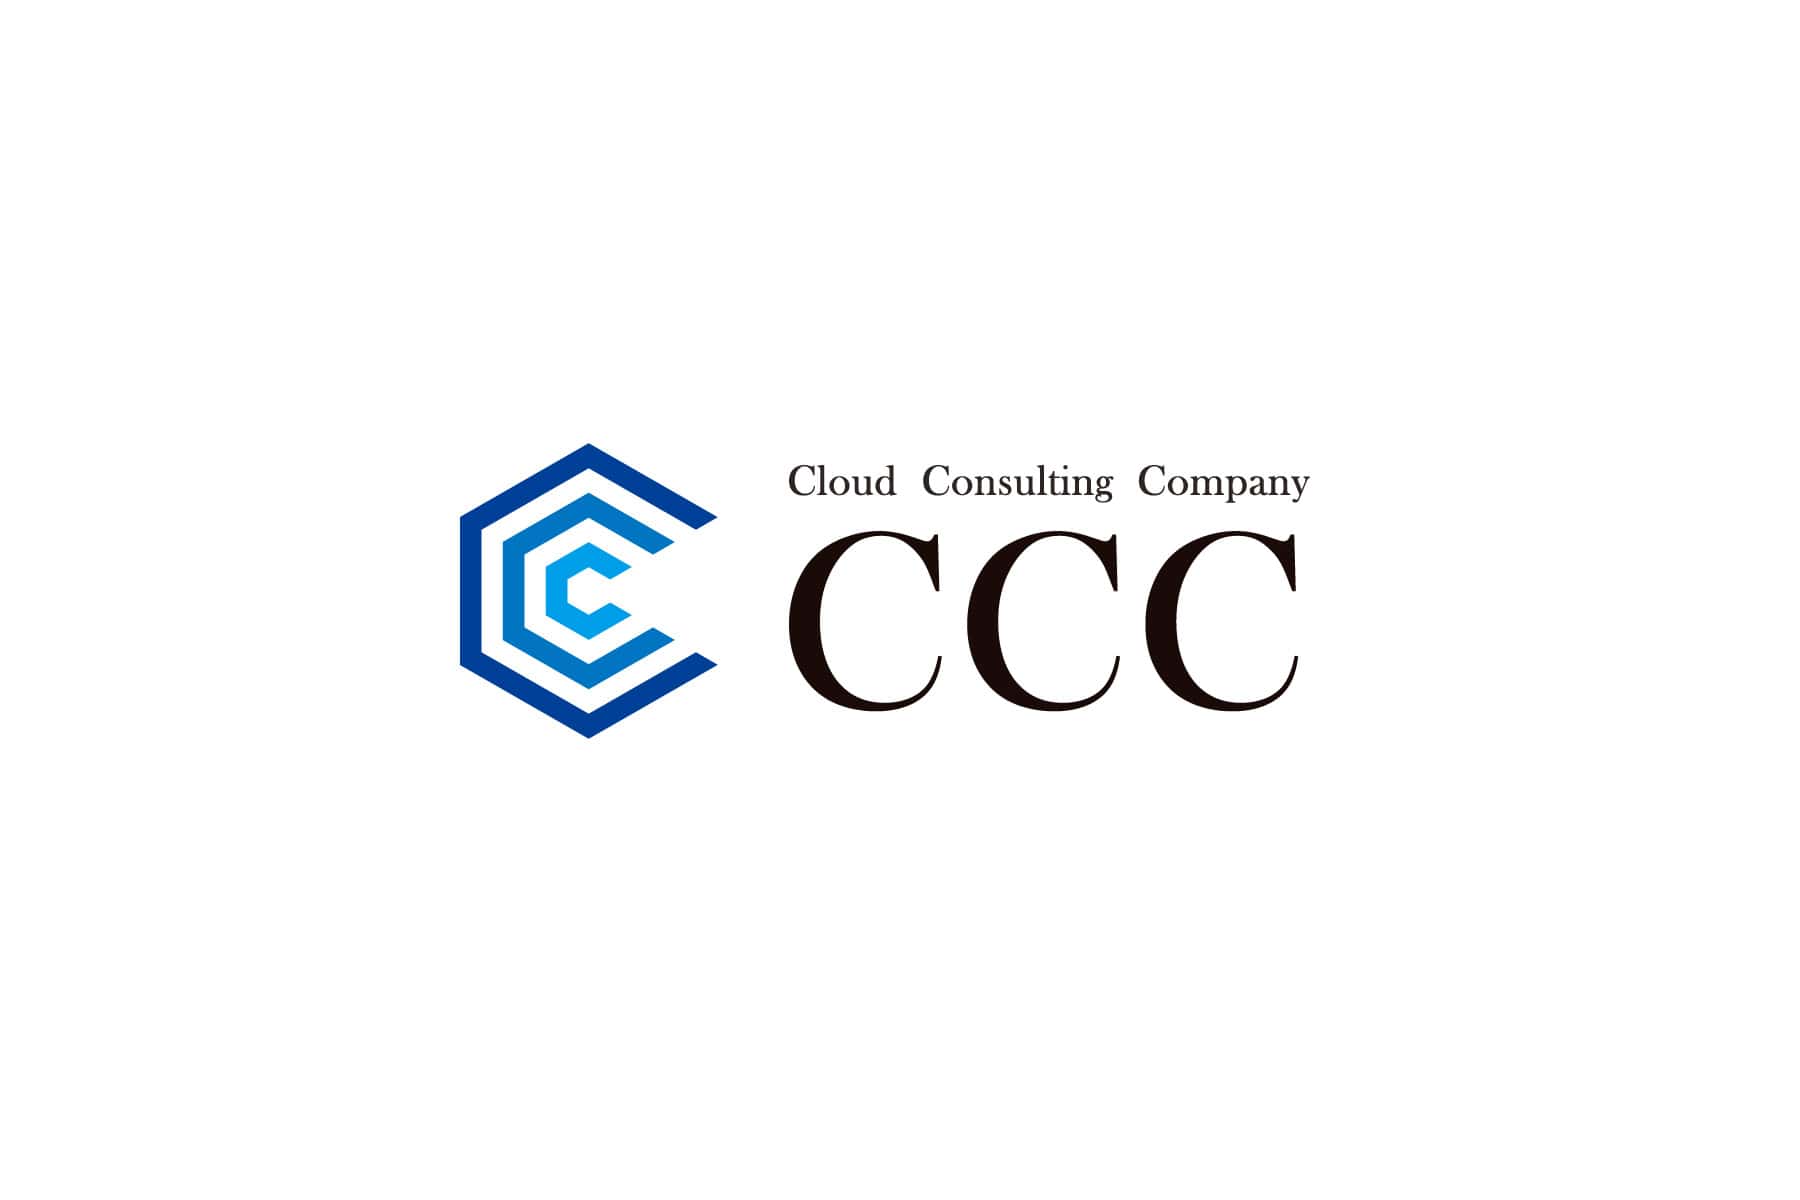 Cloud Consulting Company 外資系コンサル企業ロゴ